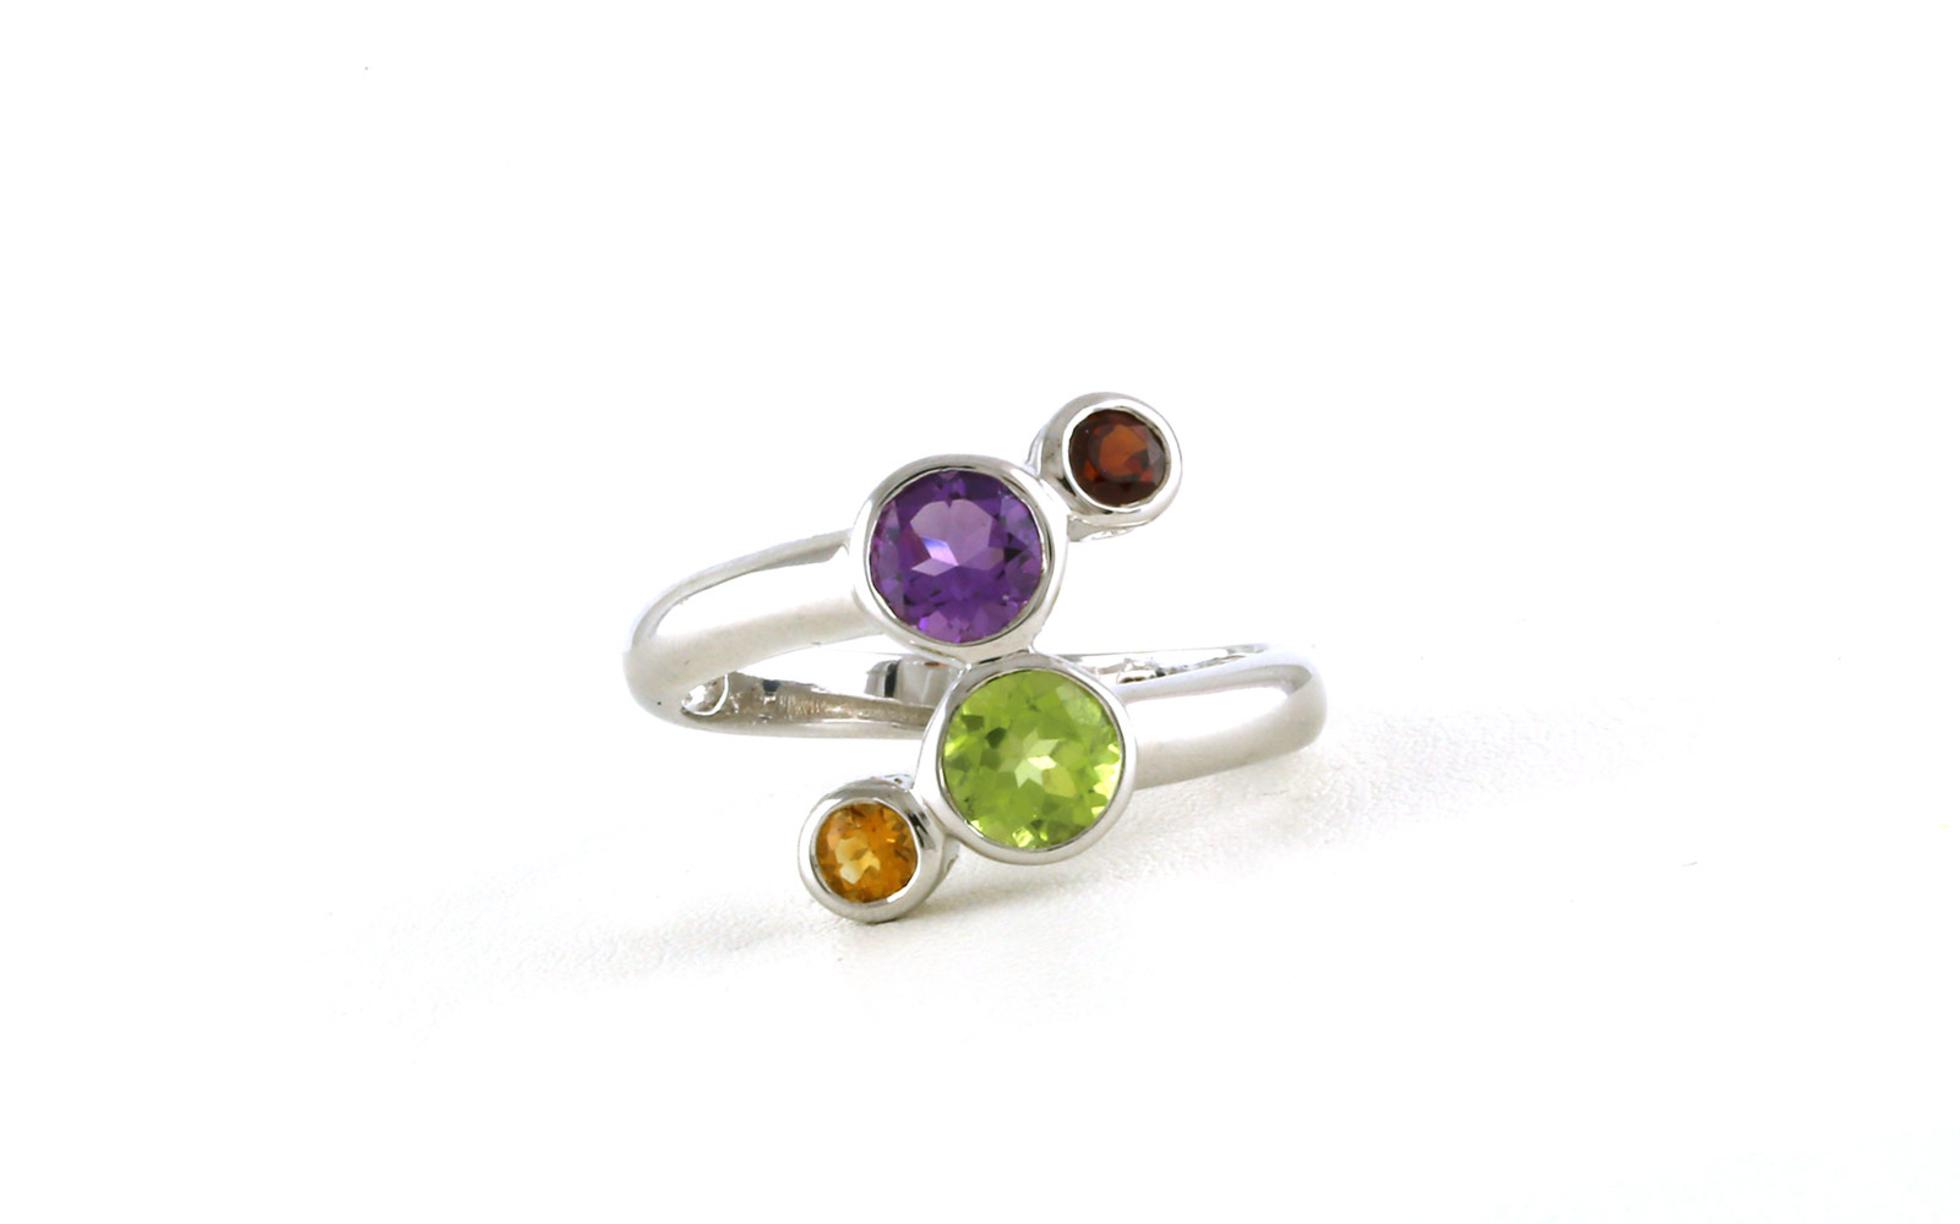 4-Stone Bezel-set Amethyst, Peridot, Garnet, and Citrine Cocktail Ring in Sterling Silver